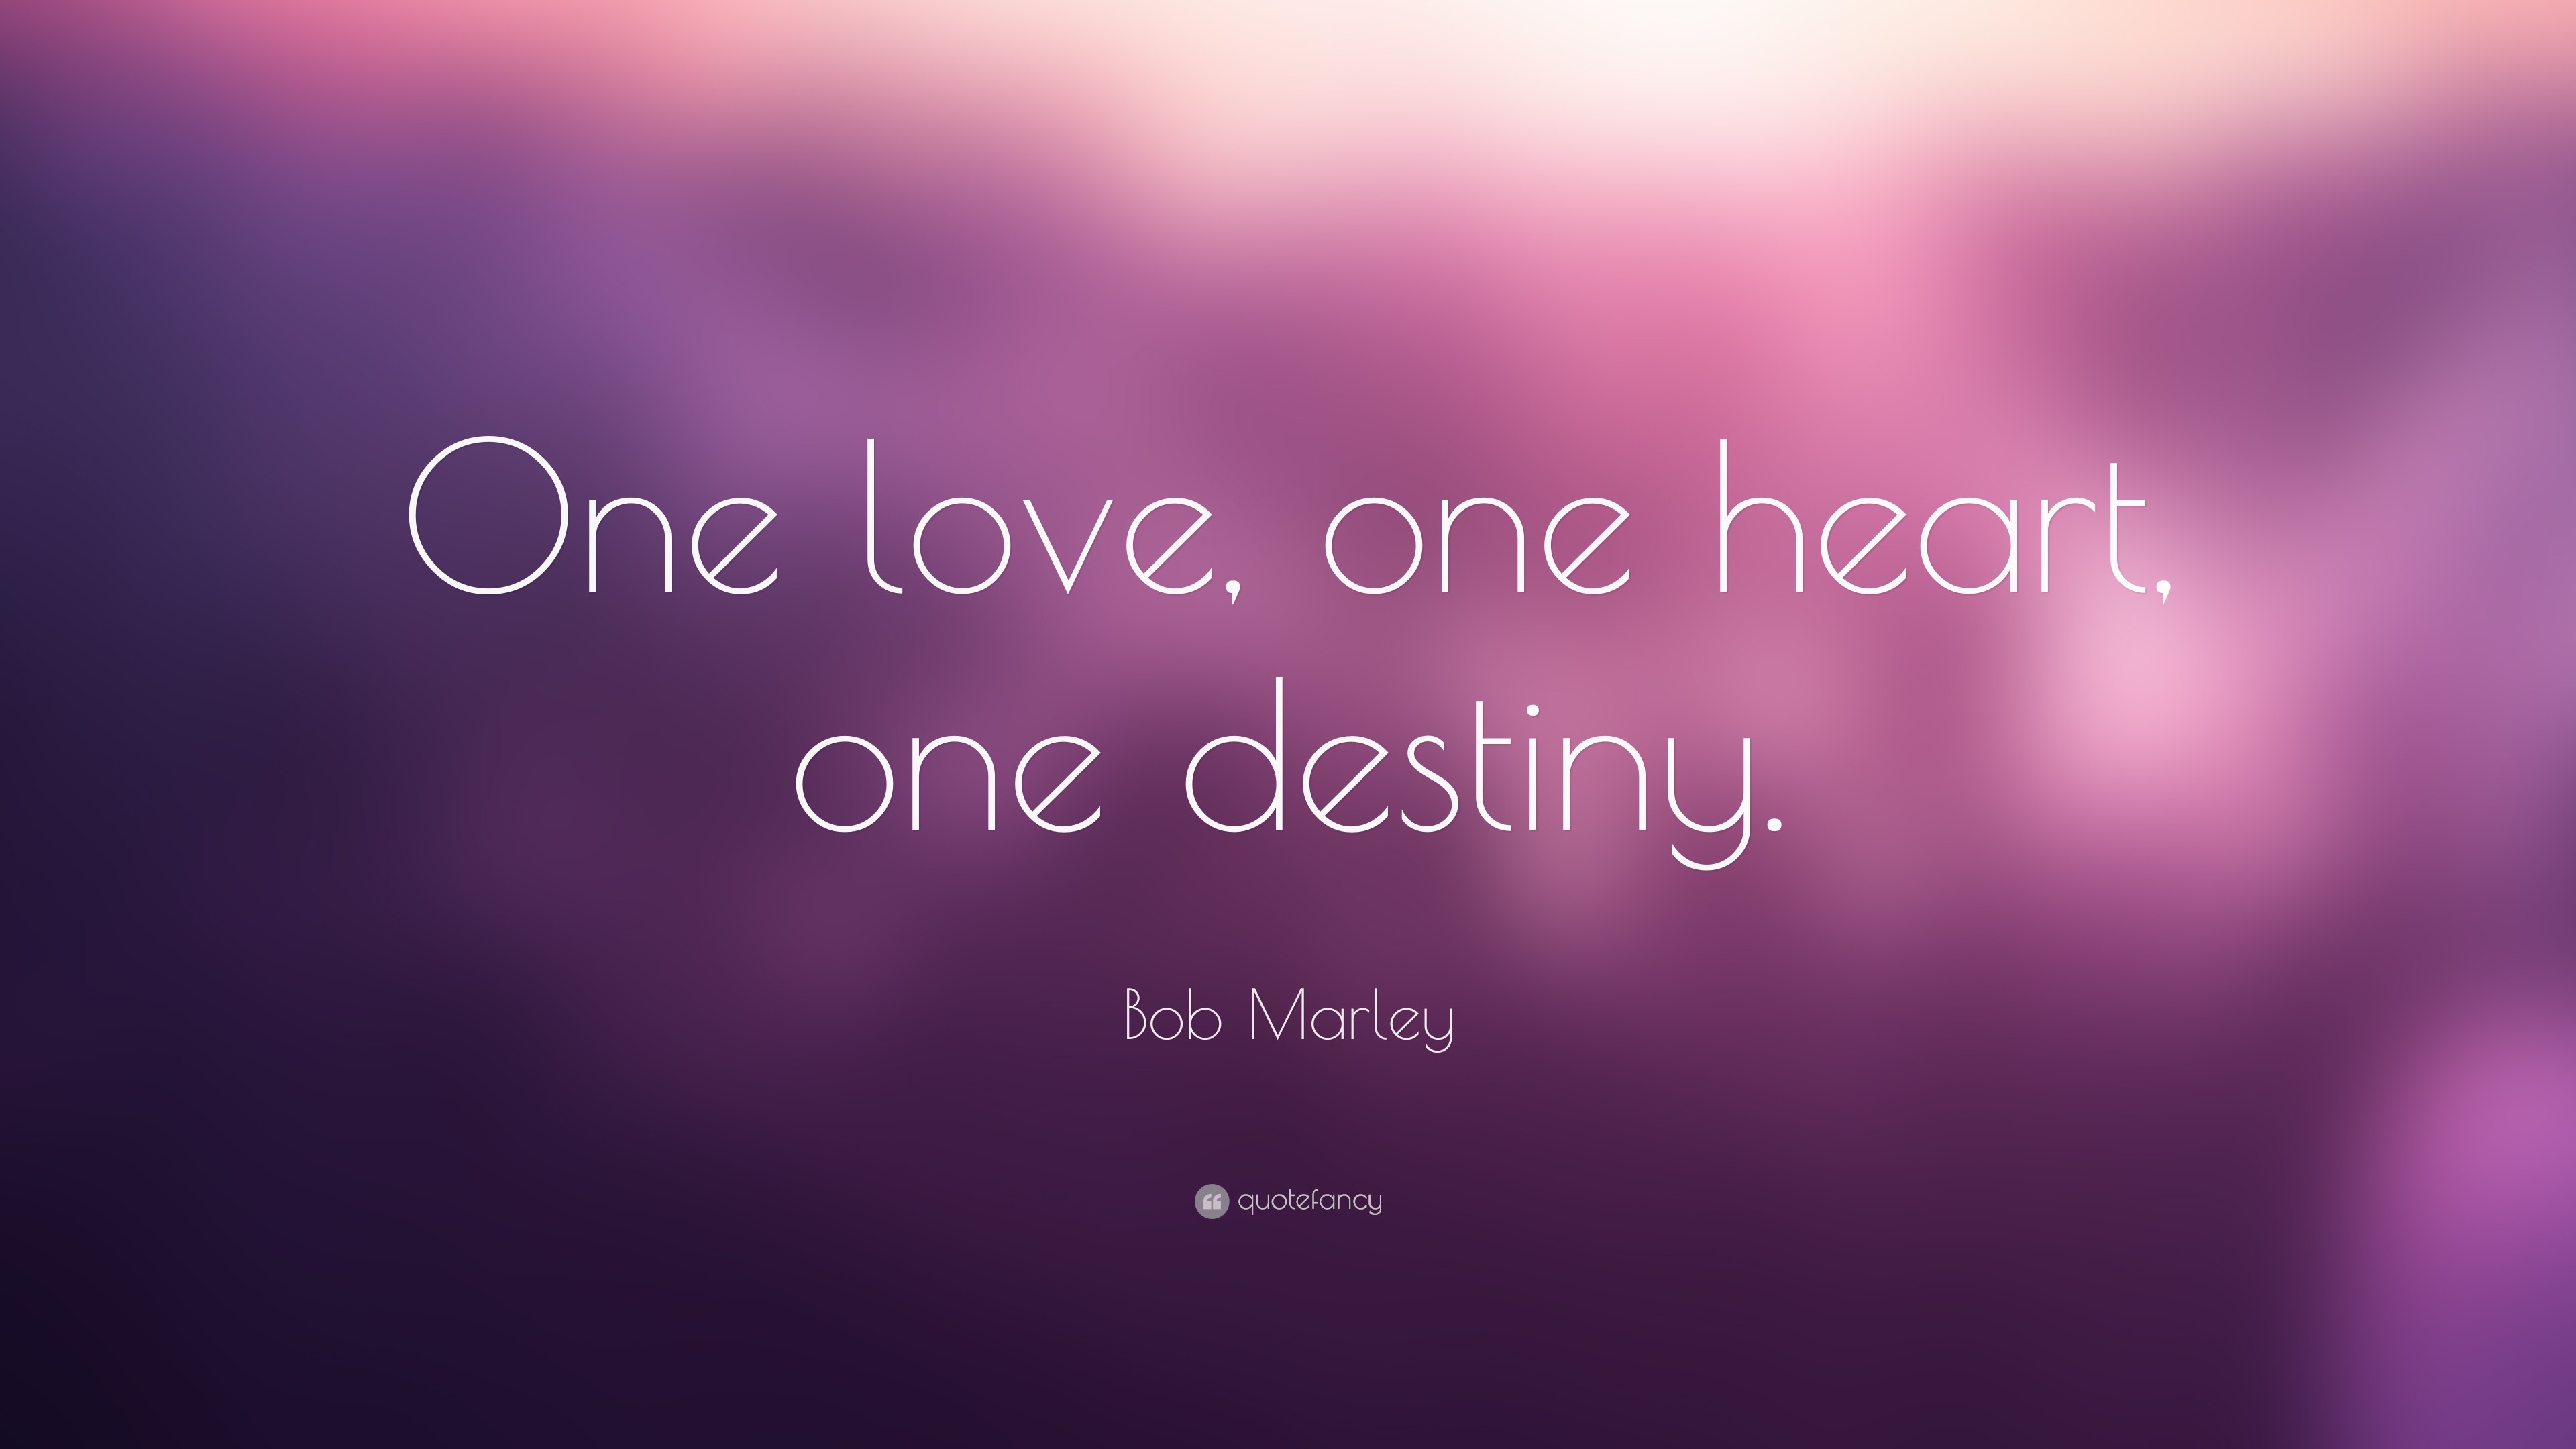 3840x2160 Love Quotes: “One love, one heart, one destiny.” — Bob